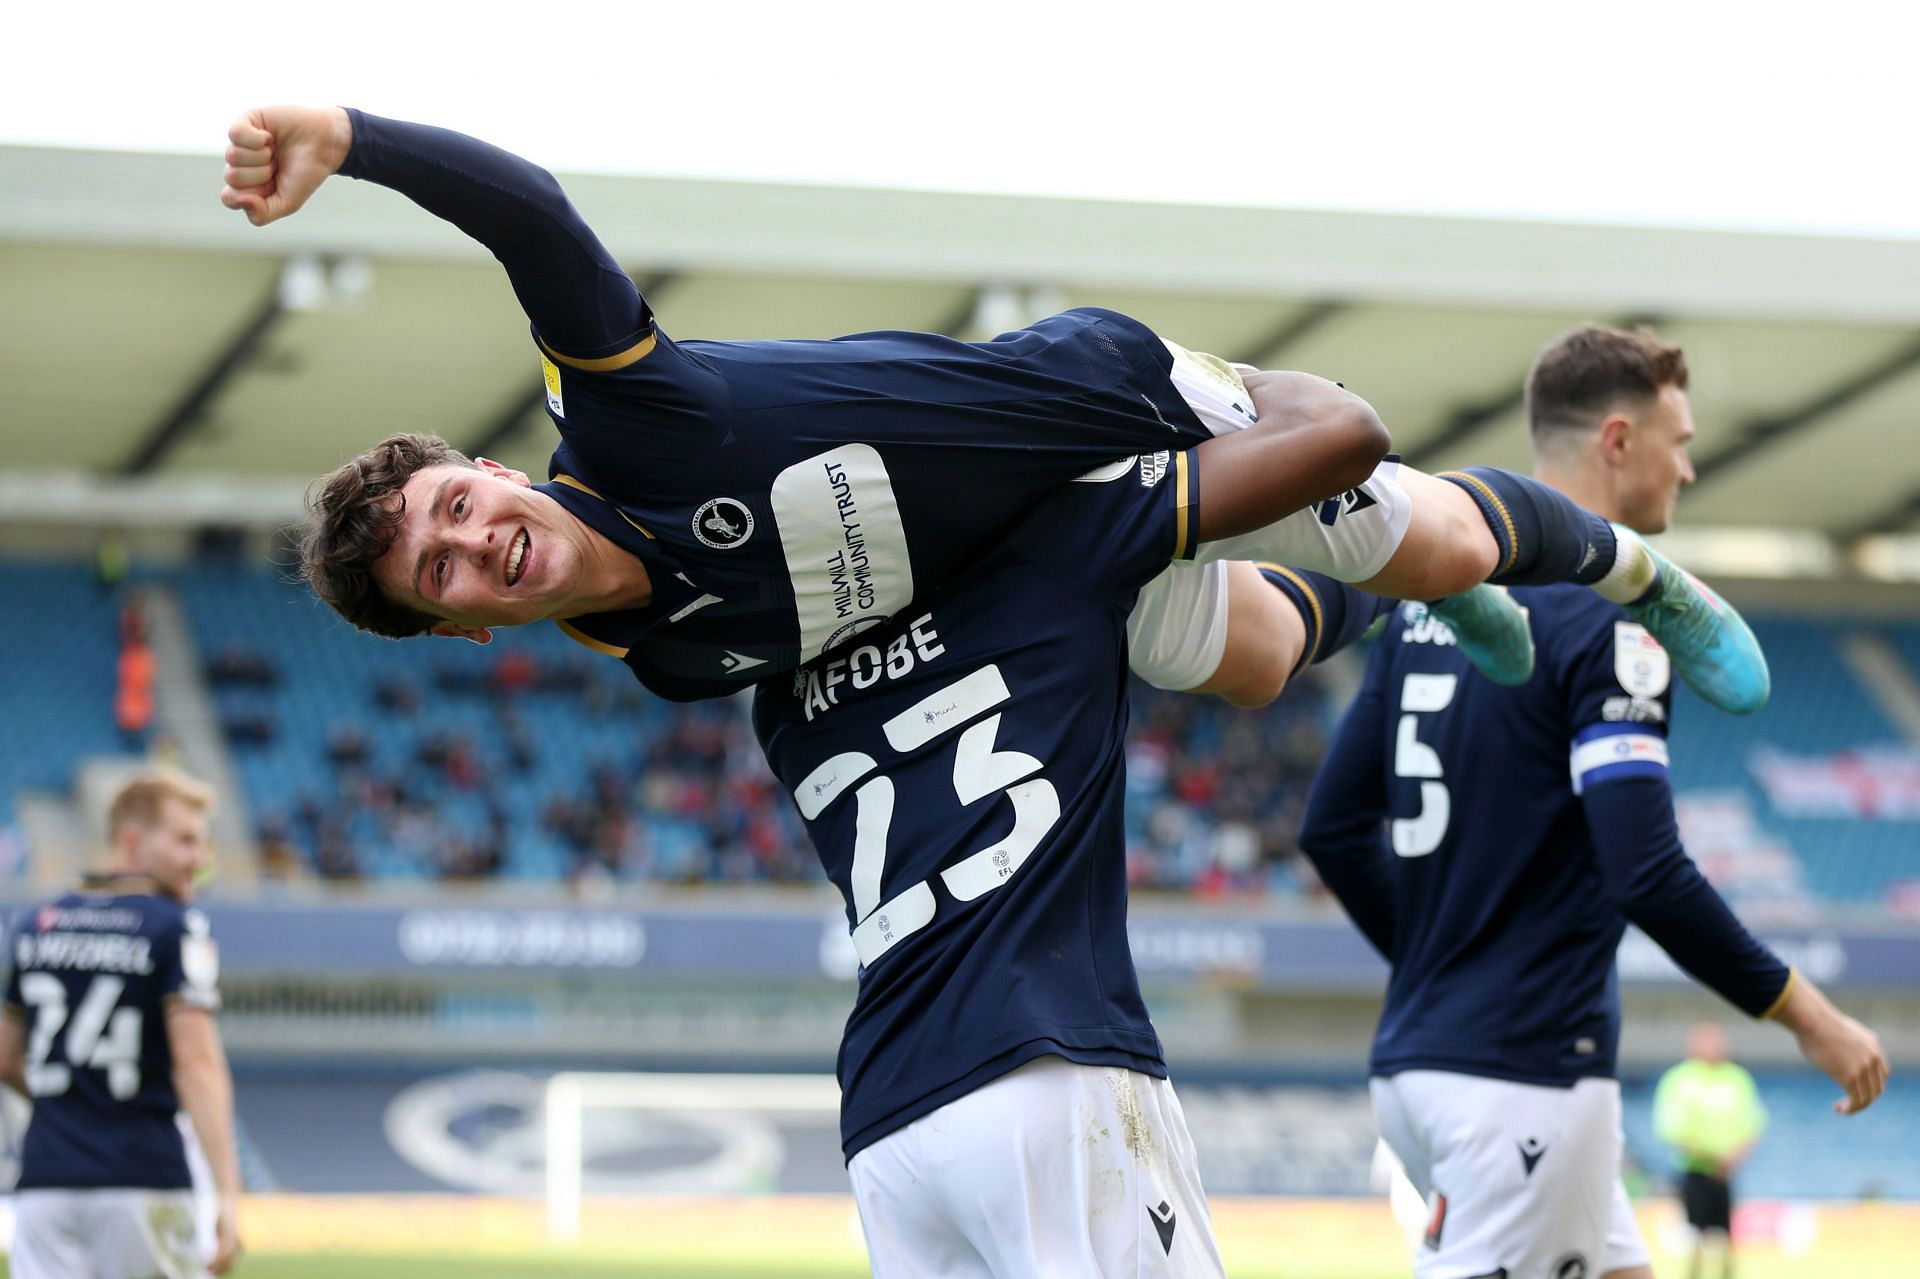 Millwall are looking to climb up the table with a win